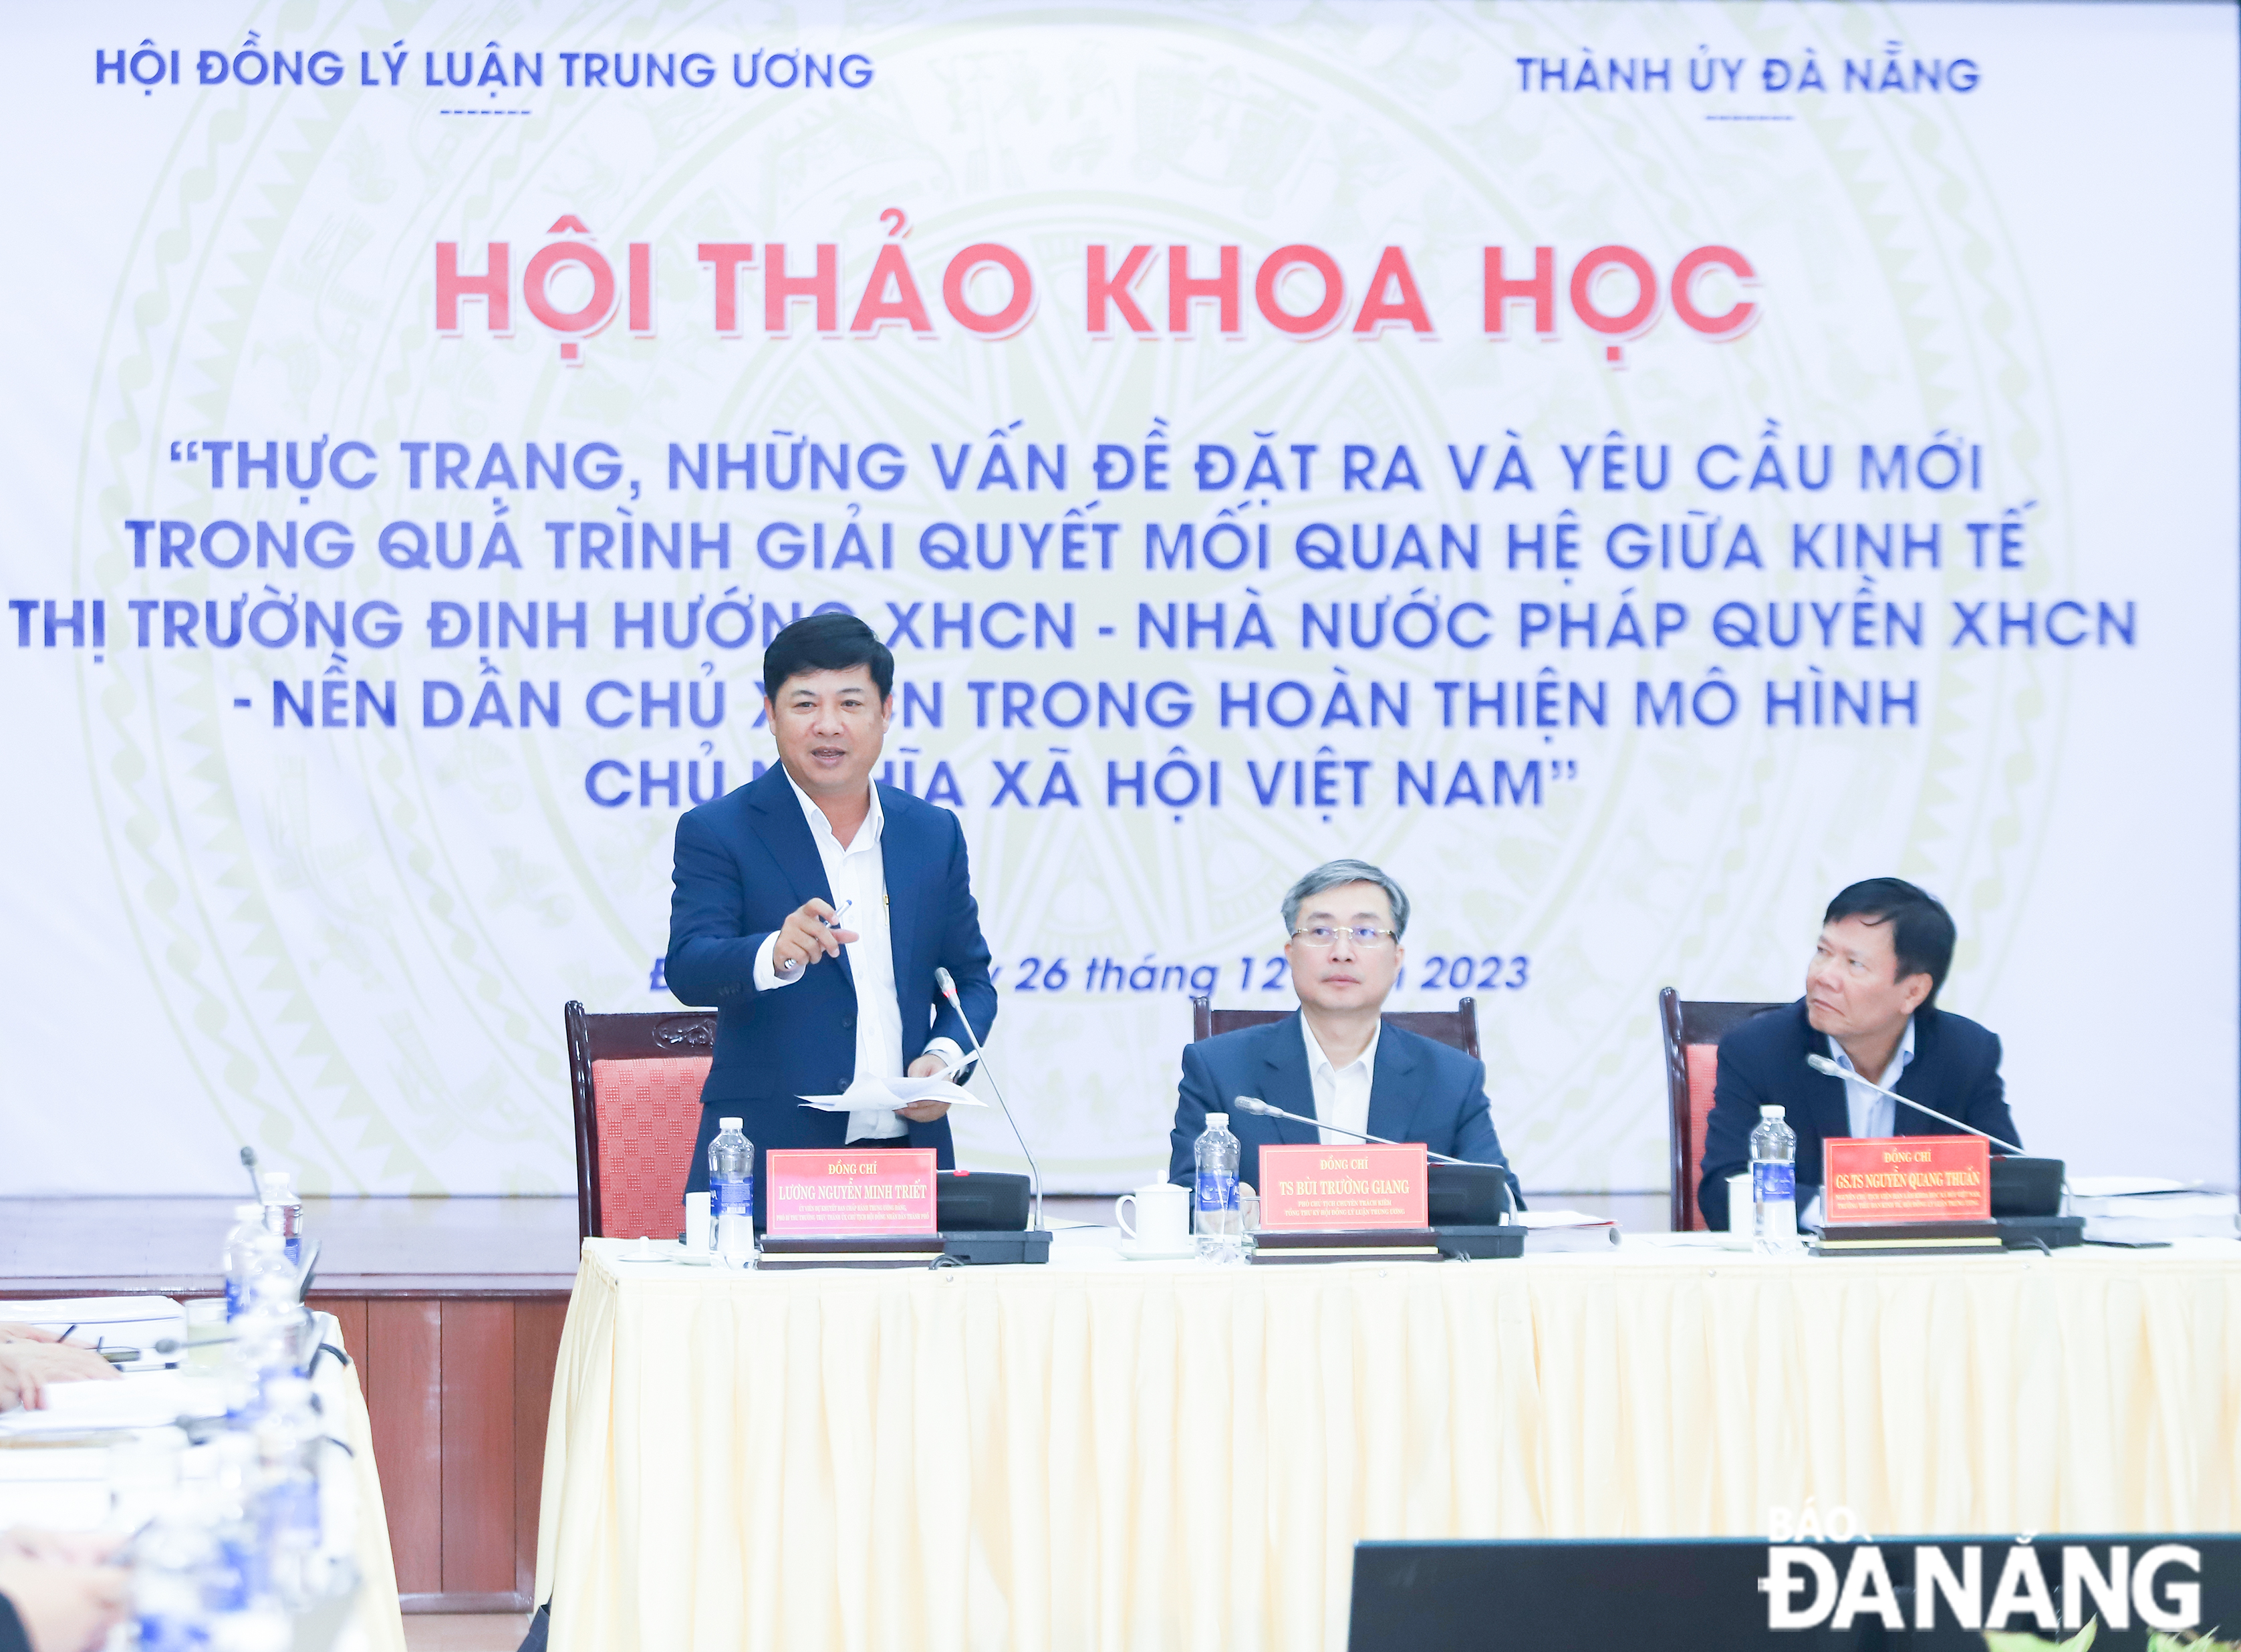 Deputy Secretary of the Da Nang Party Committee Luong Nguyen Minh Triet speaking at the conference. Photo: NGOC PHU